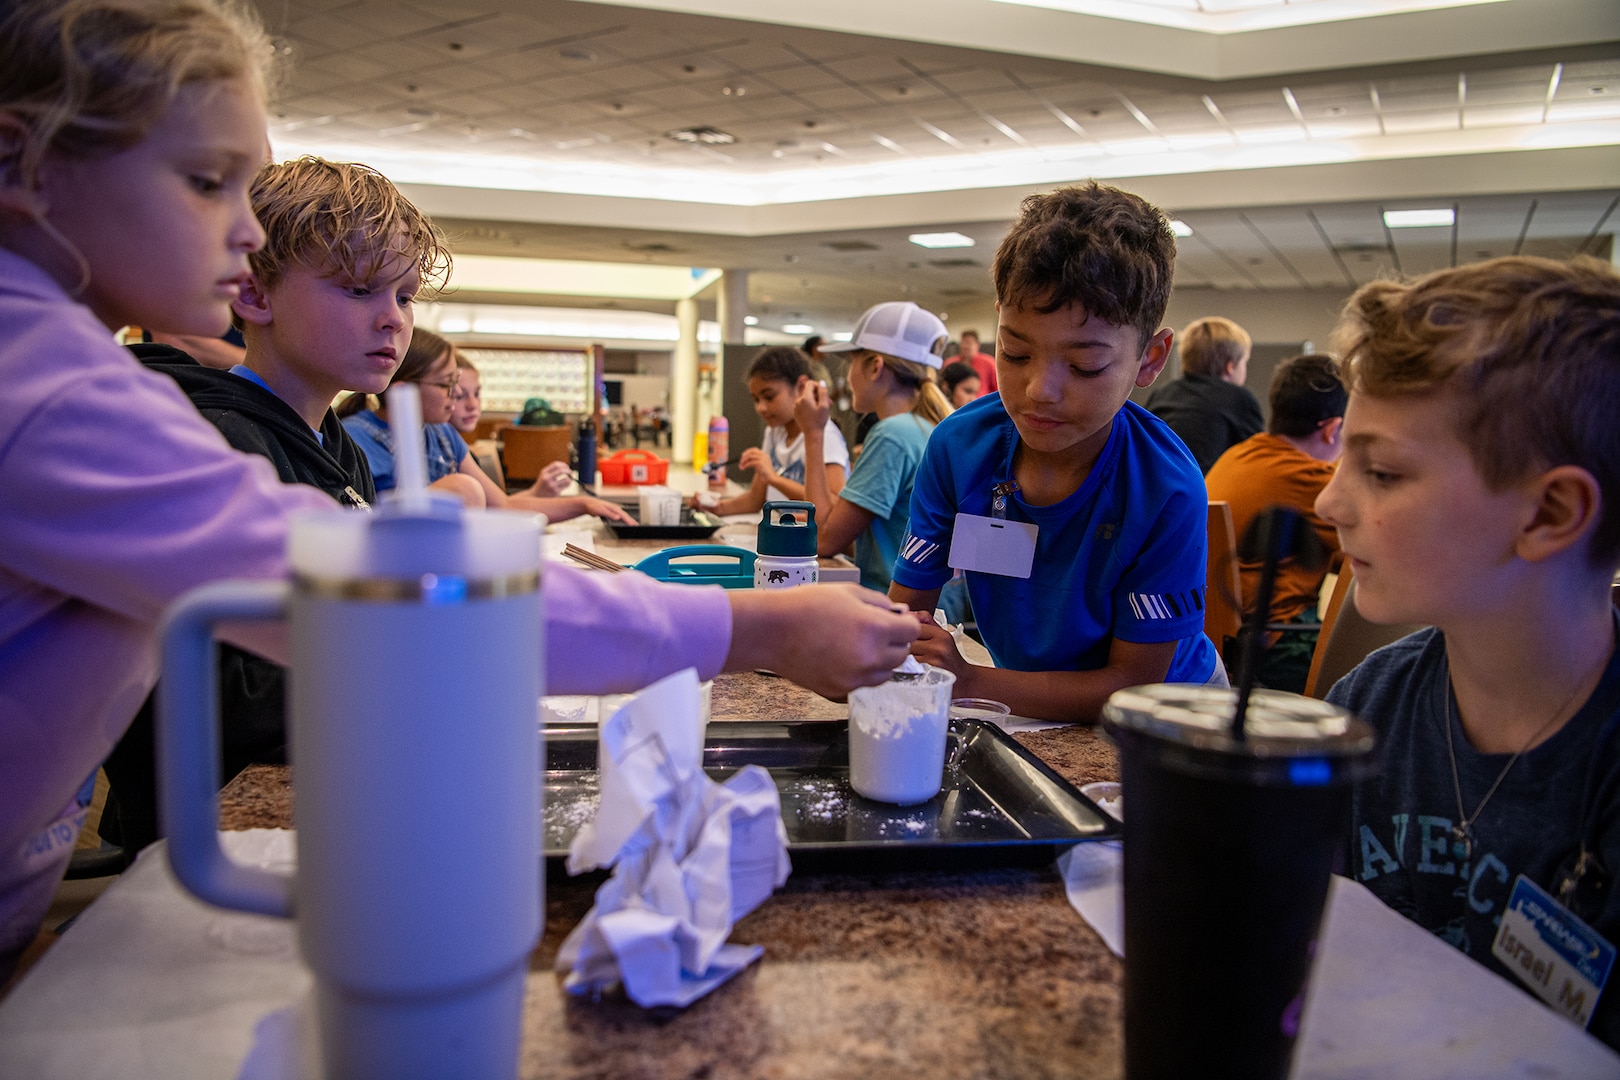 STARBASE Oklahoma City campers take part in a science experiment during the STARBASE OKC summer camp at Will Rogers Air National Guard Base in Oklahoma City, June 10, 2024. More than 50 children of Oklahoma National Guard members and Will Rogers Air National Guard base employees attended the camp where they took part in science experiments, built and coded robots to complete simple tasks, learned about computer-aided design, and met with National Guard members to hear how STEM education helped propel them on successful careers in the military. (Oklahoma National Guard photo by Anthony Jones)